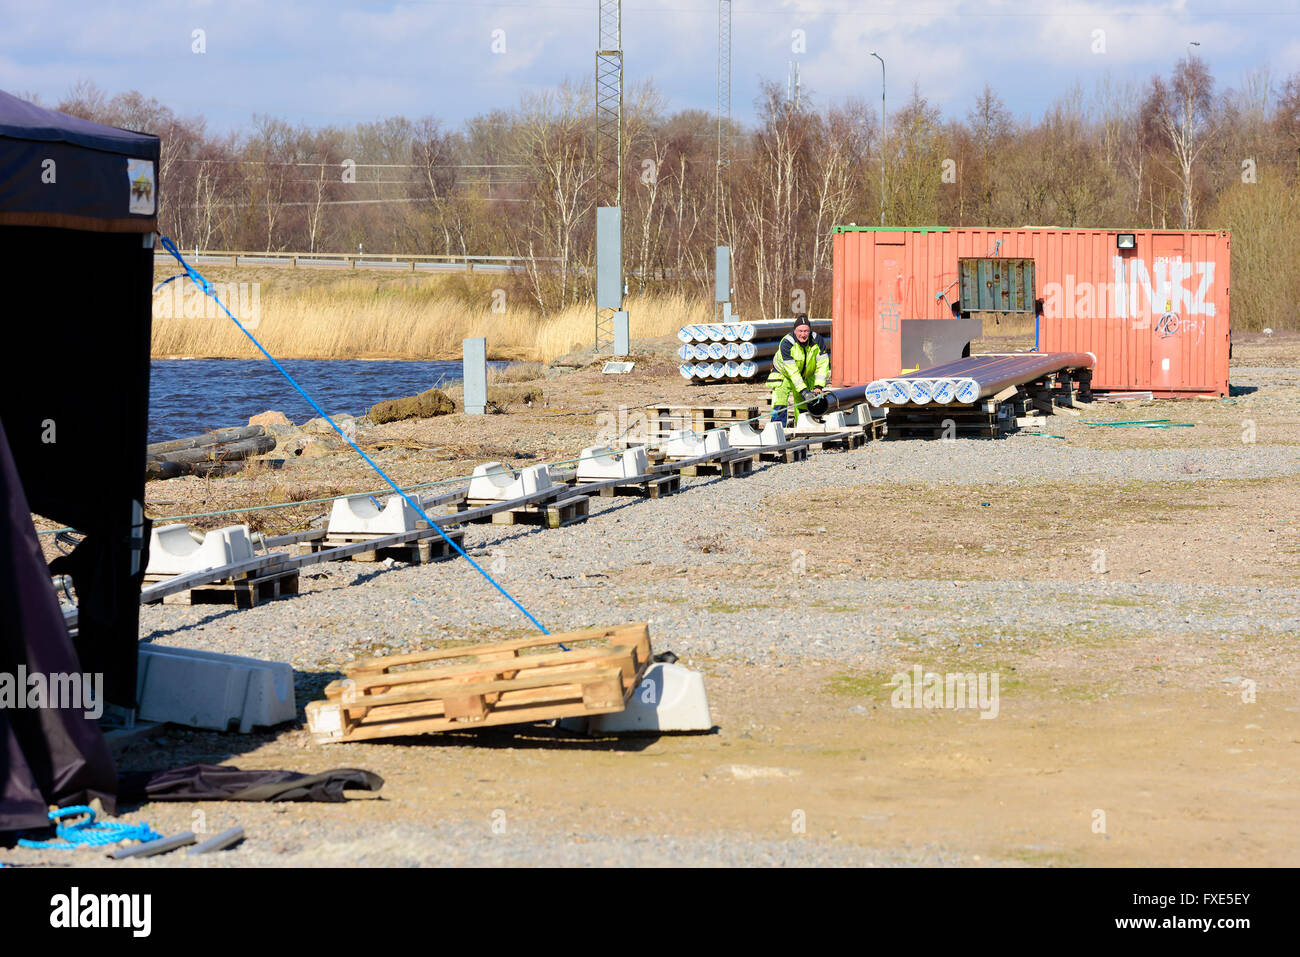 Karlskrona, Sweden - April 7, 2016: Assembly of underwater sewage pipeline in public area. Here a man is mounting a line to the Stock Photo